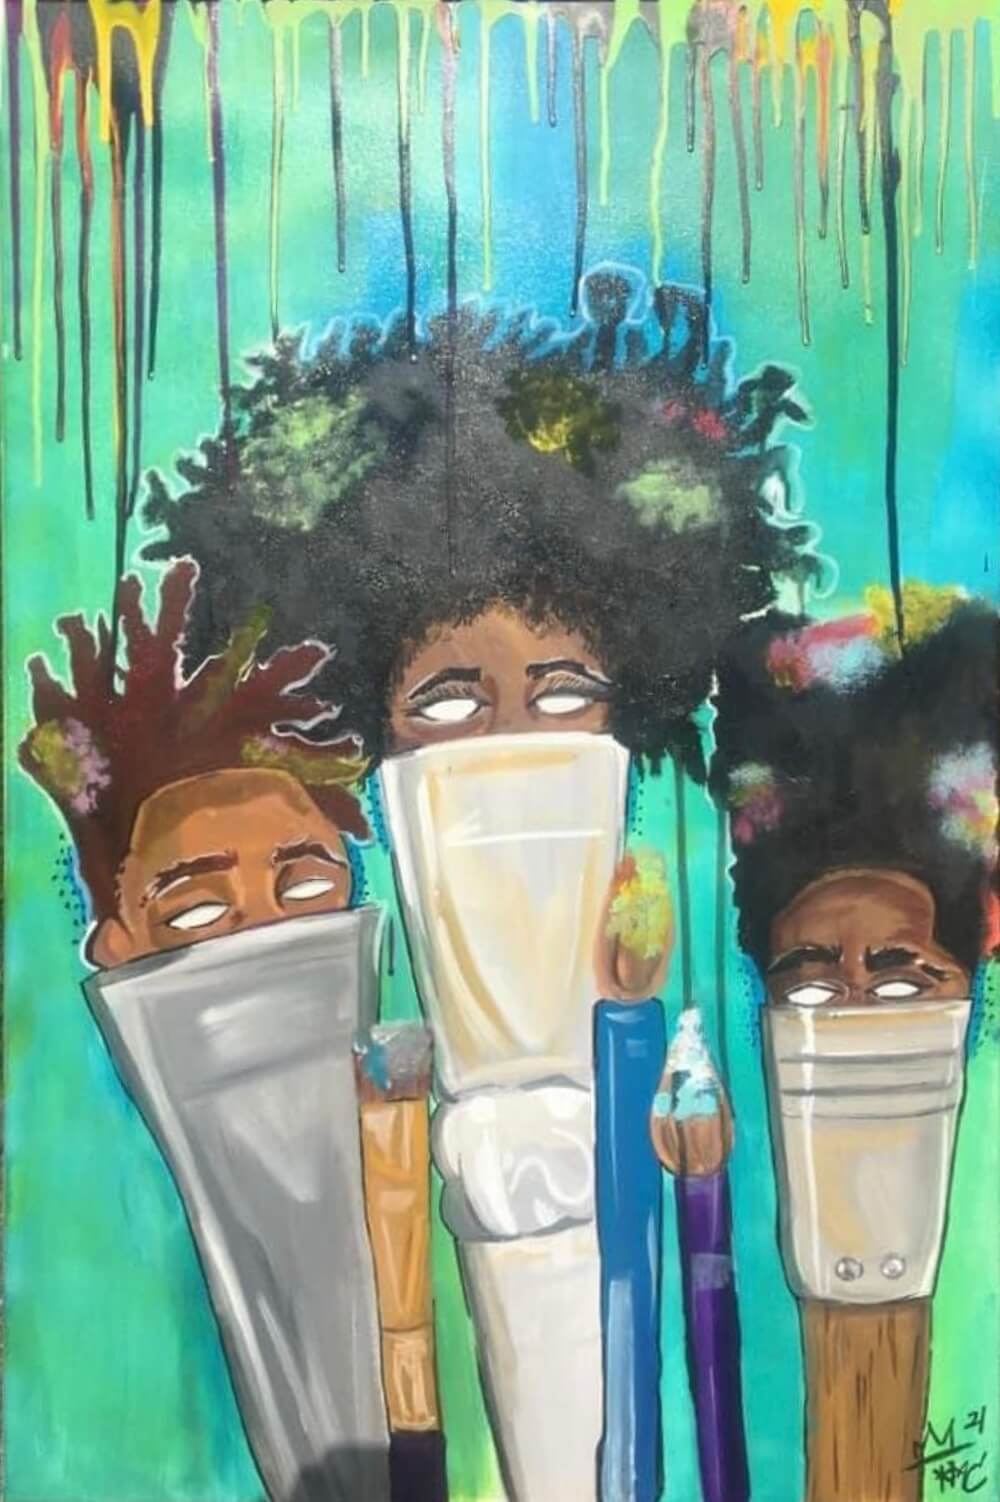 Photograph of a painting by Kerrigan Casey. Three oversized paintbrushes stand upright in front of an electric green background. Instead of paint bristles, each brush has the top half of a Black head from the bridge of the nose up, with blank white eyes and hair holding splotches of colorful paint. Three smaller brushes are displayed in the foreground, with typical bristles covered in paint. Across the top of the canvas, rivulets of yellow, orange, green, and black paint drip down.